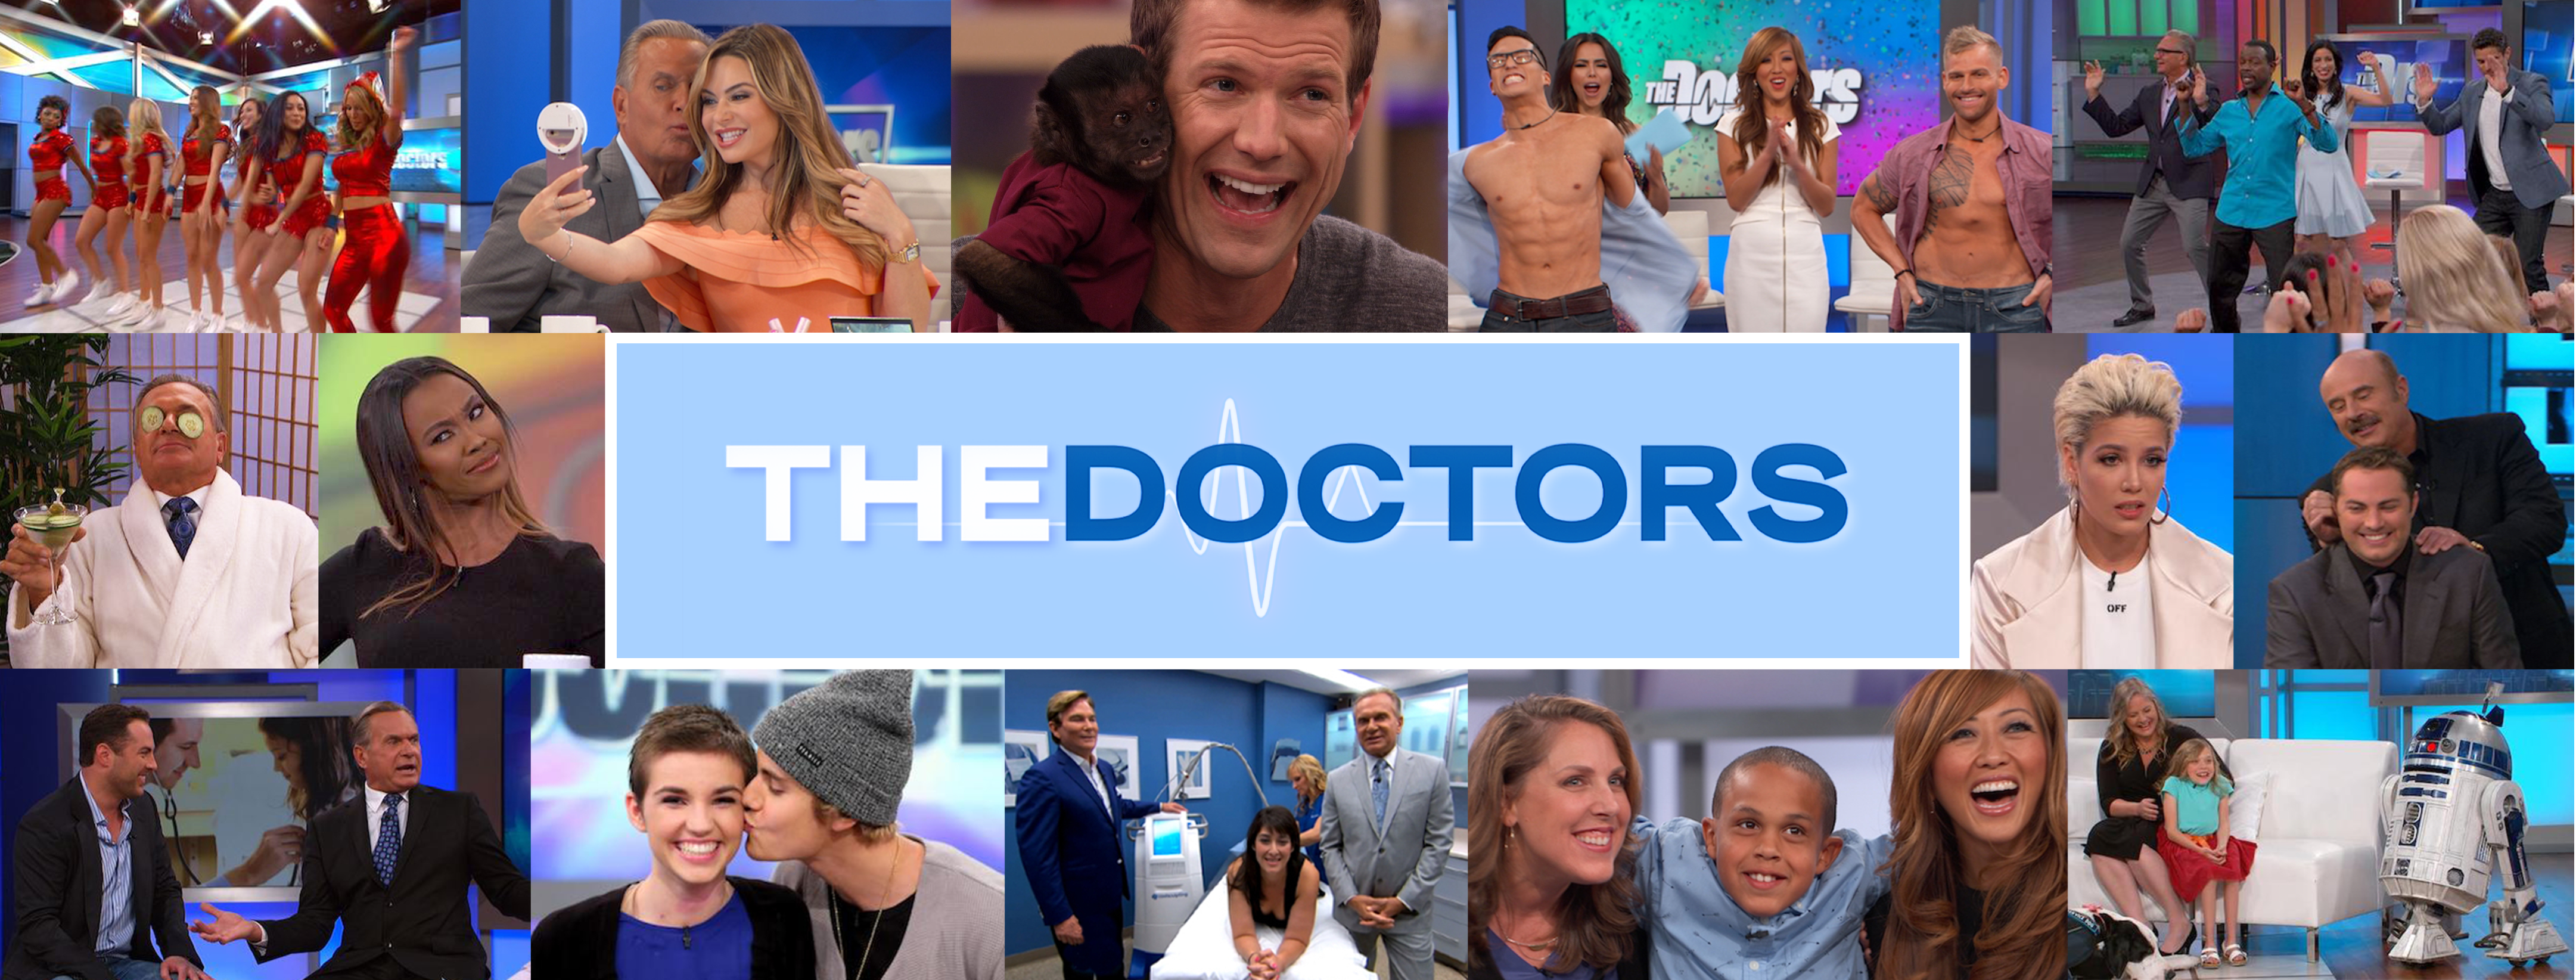 The FDA Approves the Moderna COVID-19 Vaccine | The Doctors TV Show